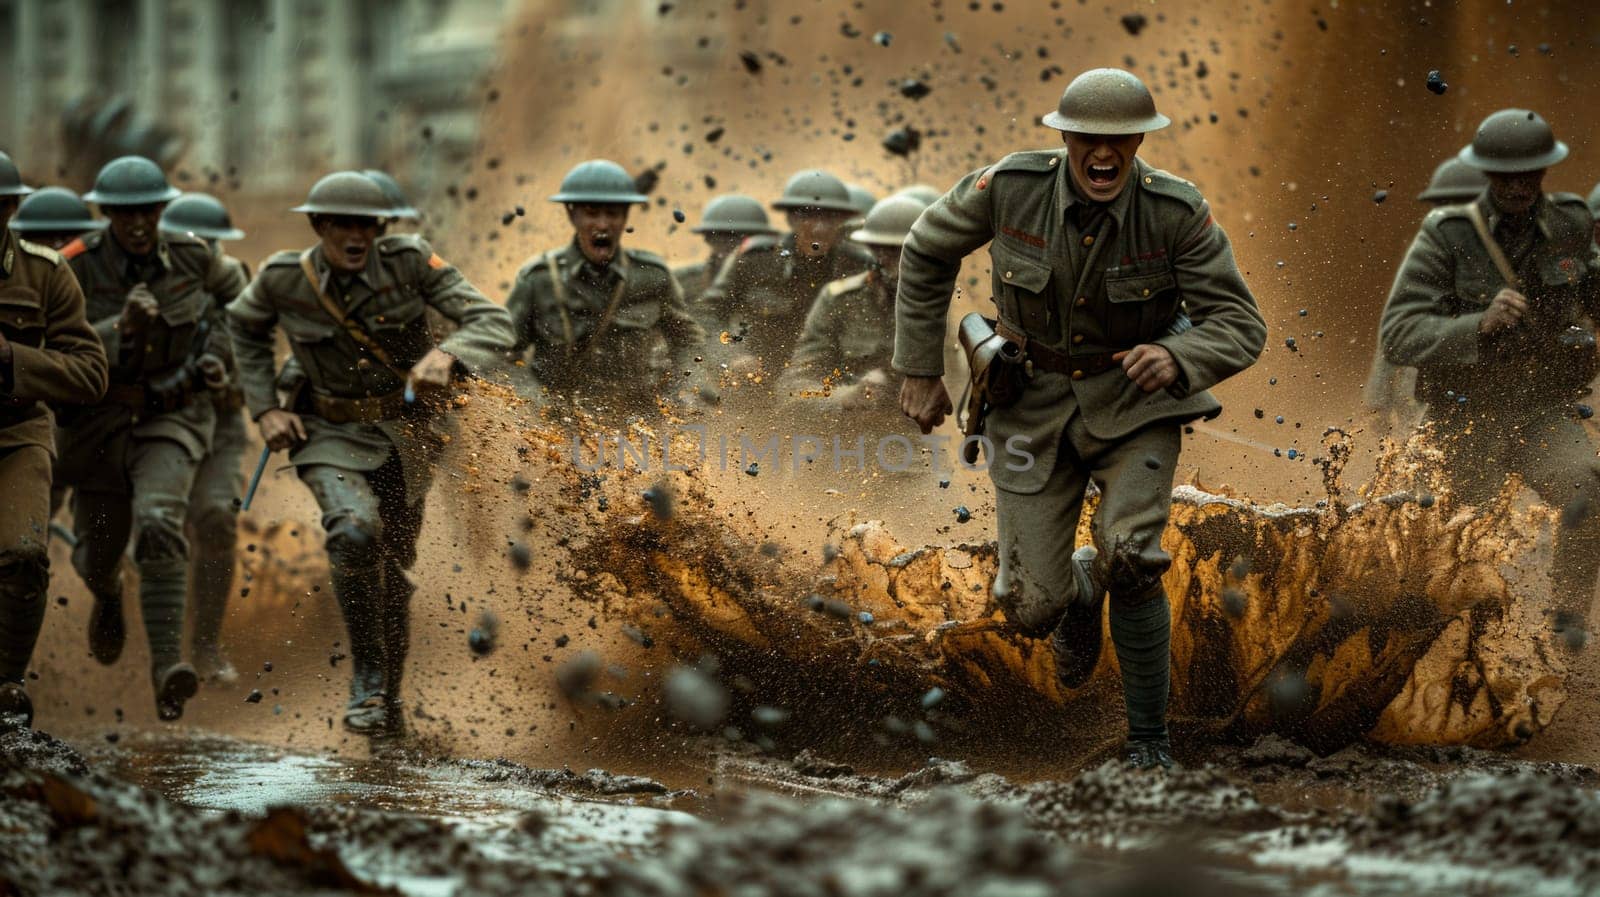 A group of soldiers in full gear running through a muddy battlefield, their determination evident in every step they take as they push forward.